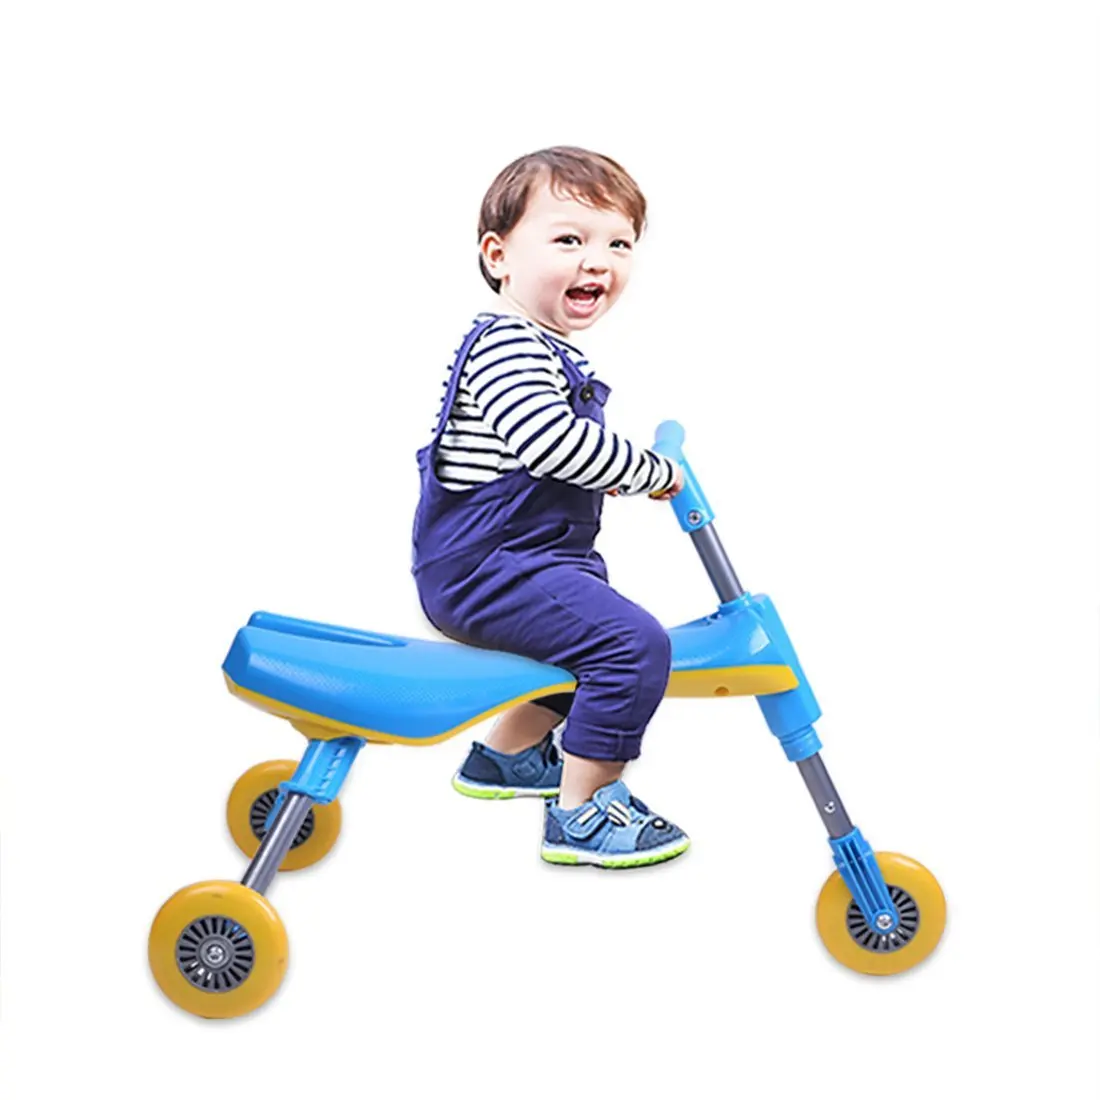 Blue No Assembly Required Mr Bigz Foldable Indoor//Outdoor Toddlers Glide Tricycle